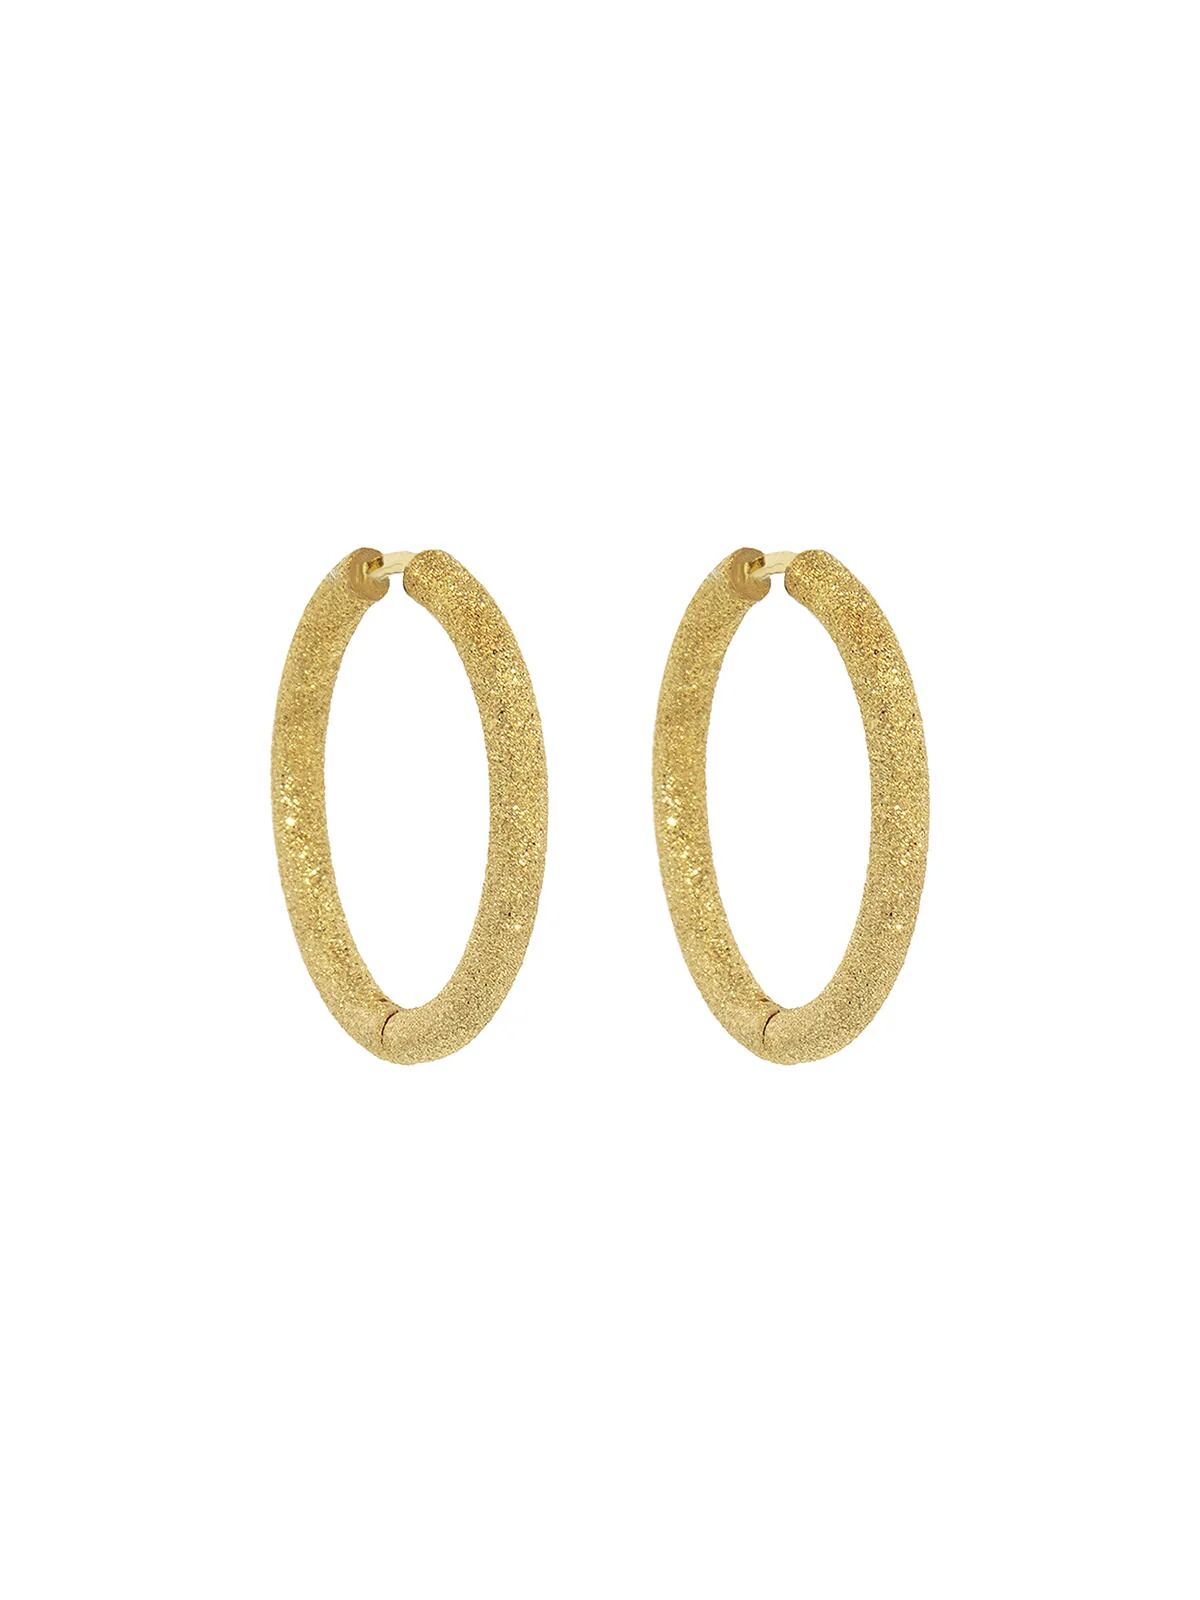 Florentine Finish 18K Yellow Gold Thick Small Hoop Earrings | YLANG 23